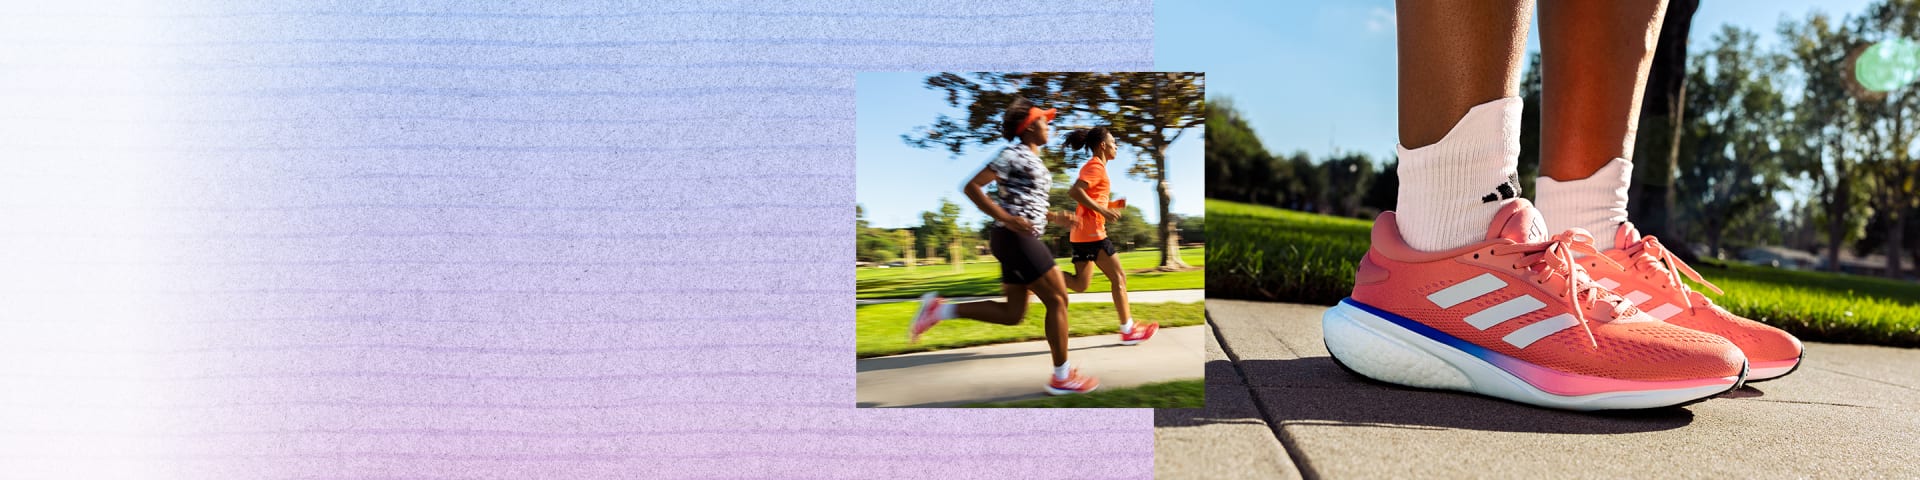 Image of 2 runners, one men and women, running together in the park and one close shot image of a pair of running shoe.